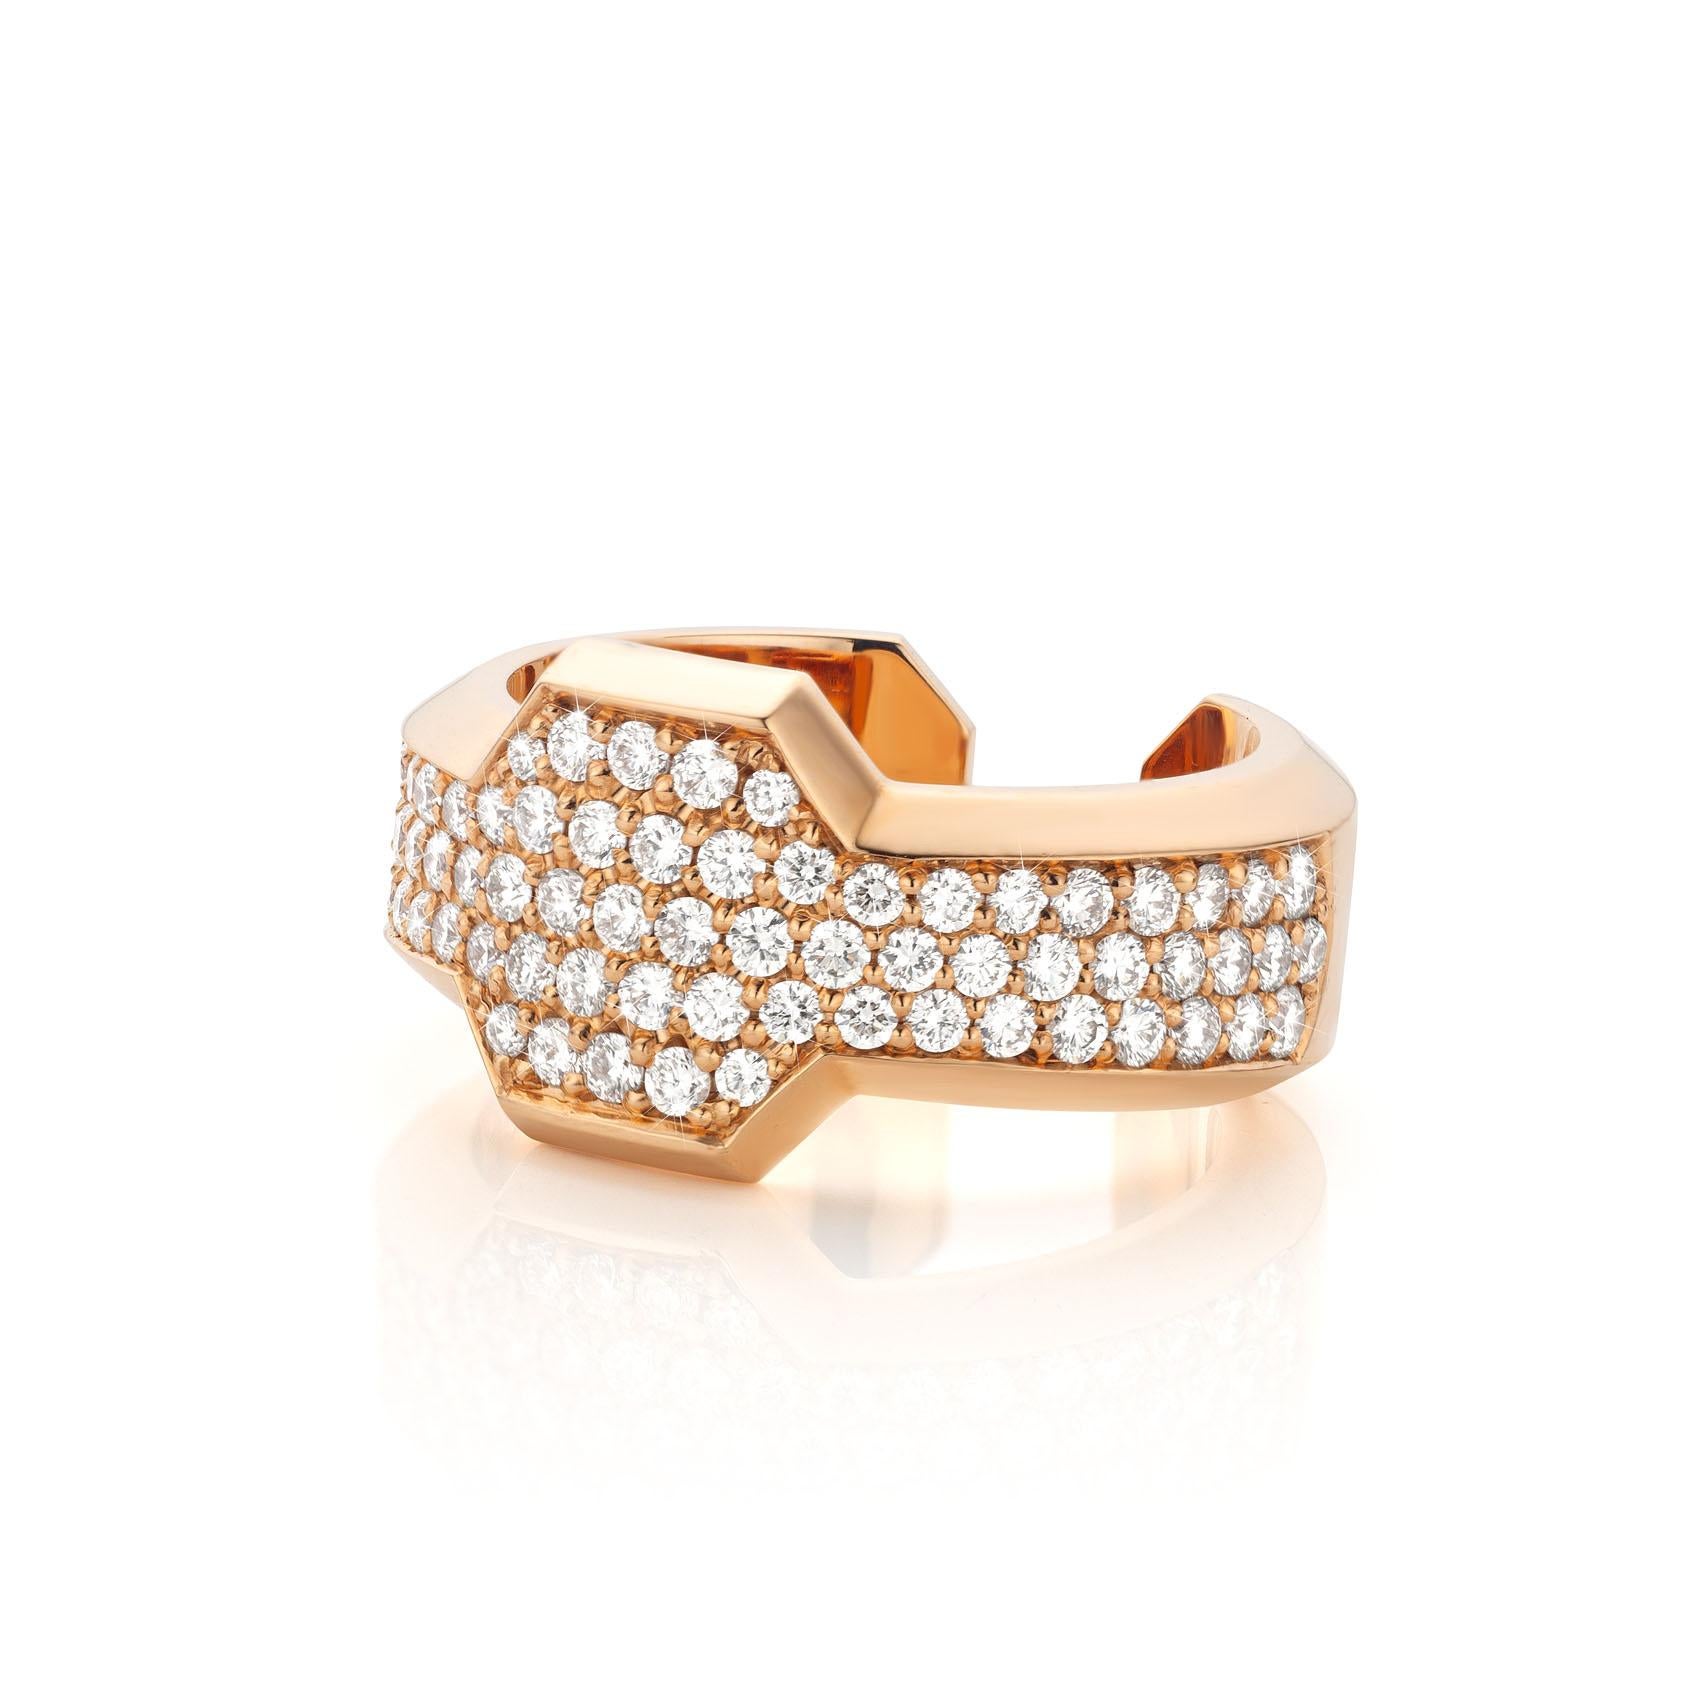 18K Rose Gold 1.03 Carat White Diamond Signet Ring by Jochen Leën In New Condition For Sale In Antwerp, BE